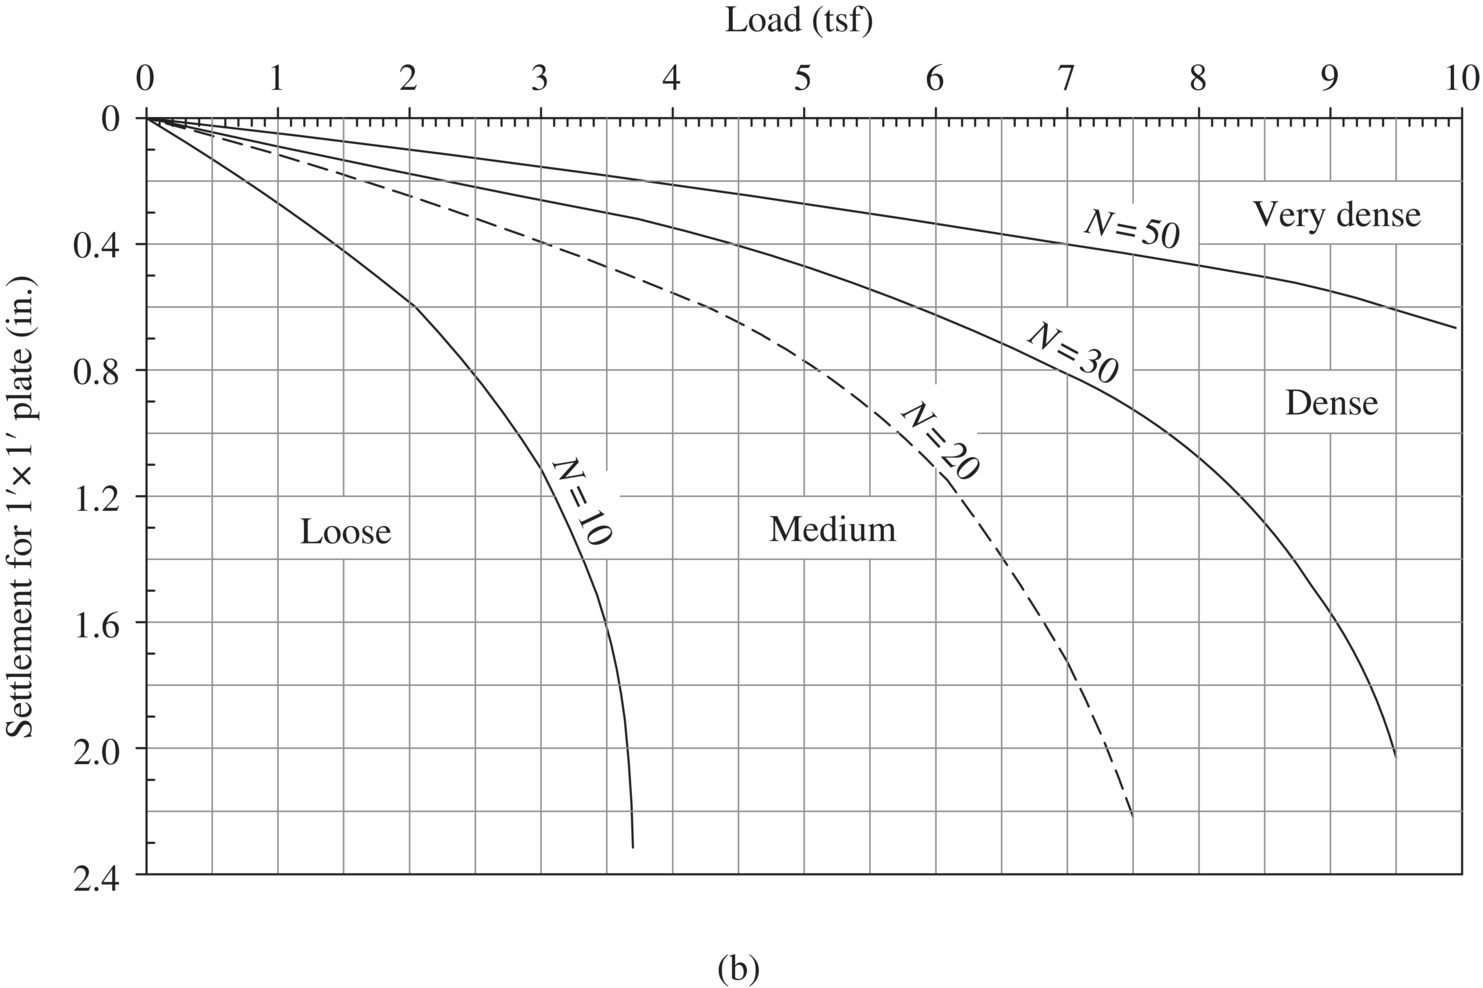 Graph of settlement for 1’ x 1’ plate vs. load with descending curves labeled N = 10 (loose), N = 20 (medium), N = 30 (dense), and N = 50 (very dense).